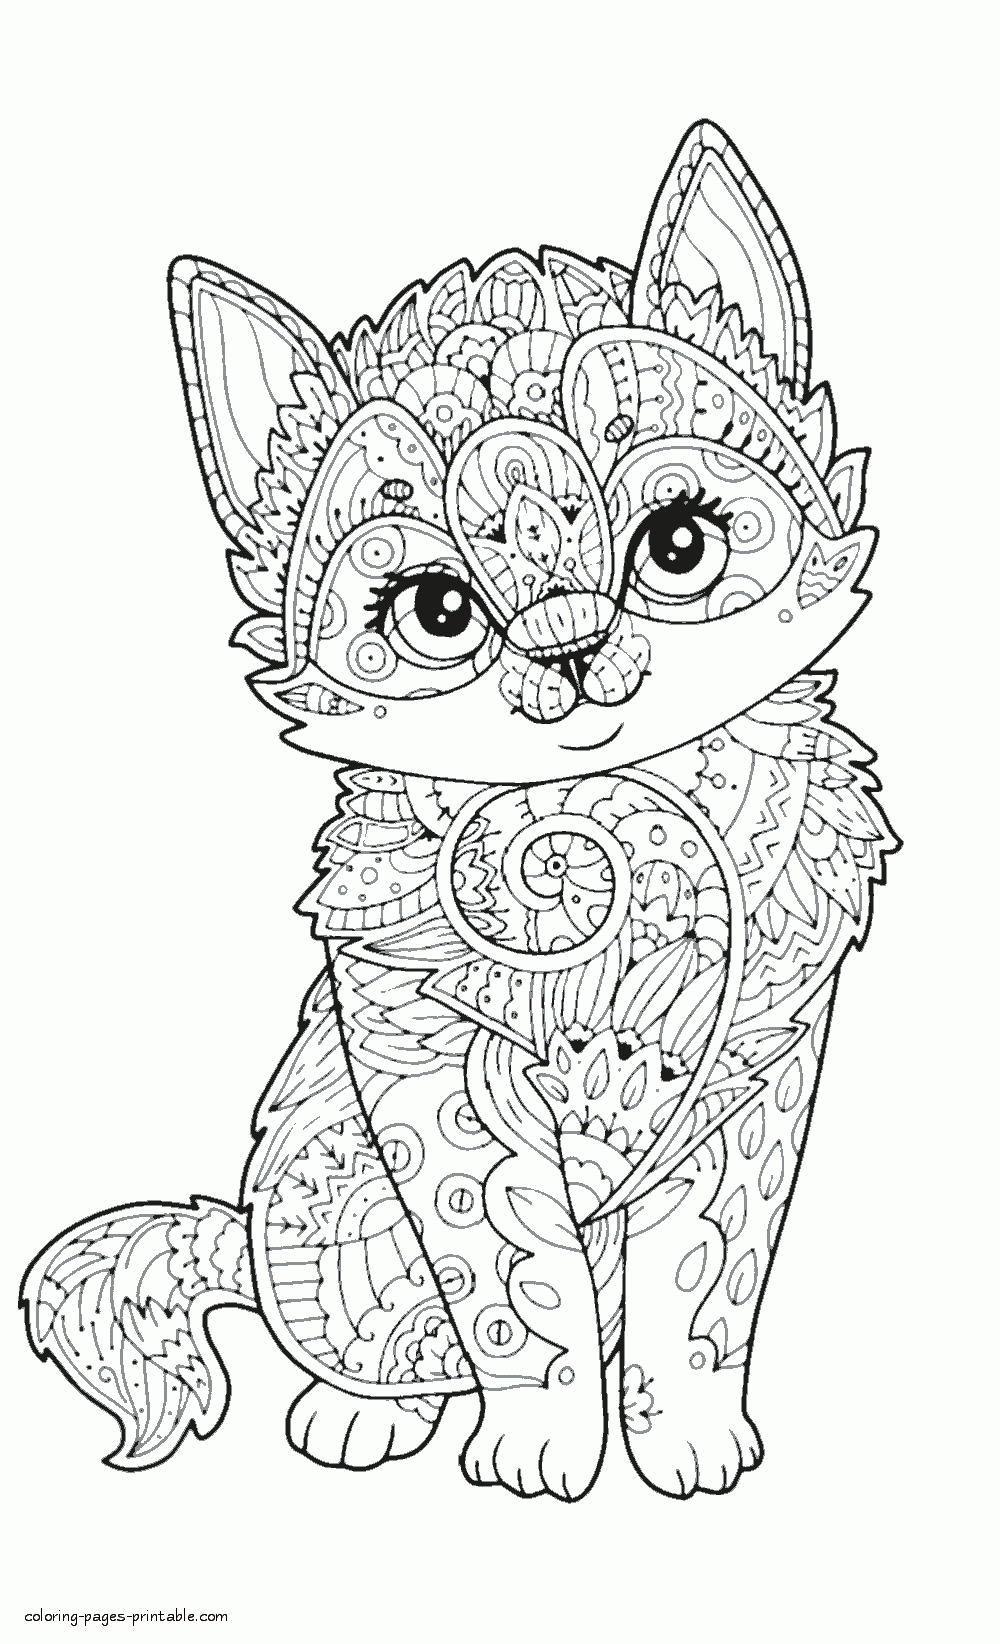 Adult Coloring Animal Pages. Cute Cat    COLORING PAGES PRINTABLE.COM